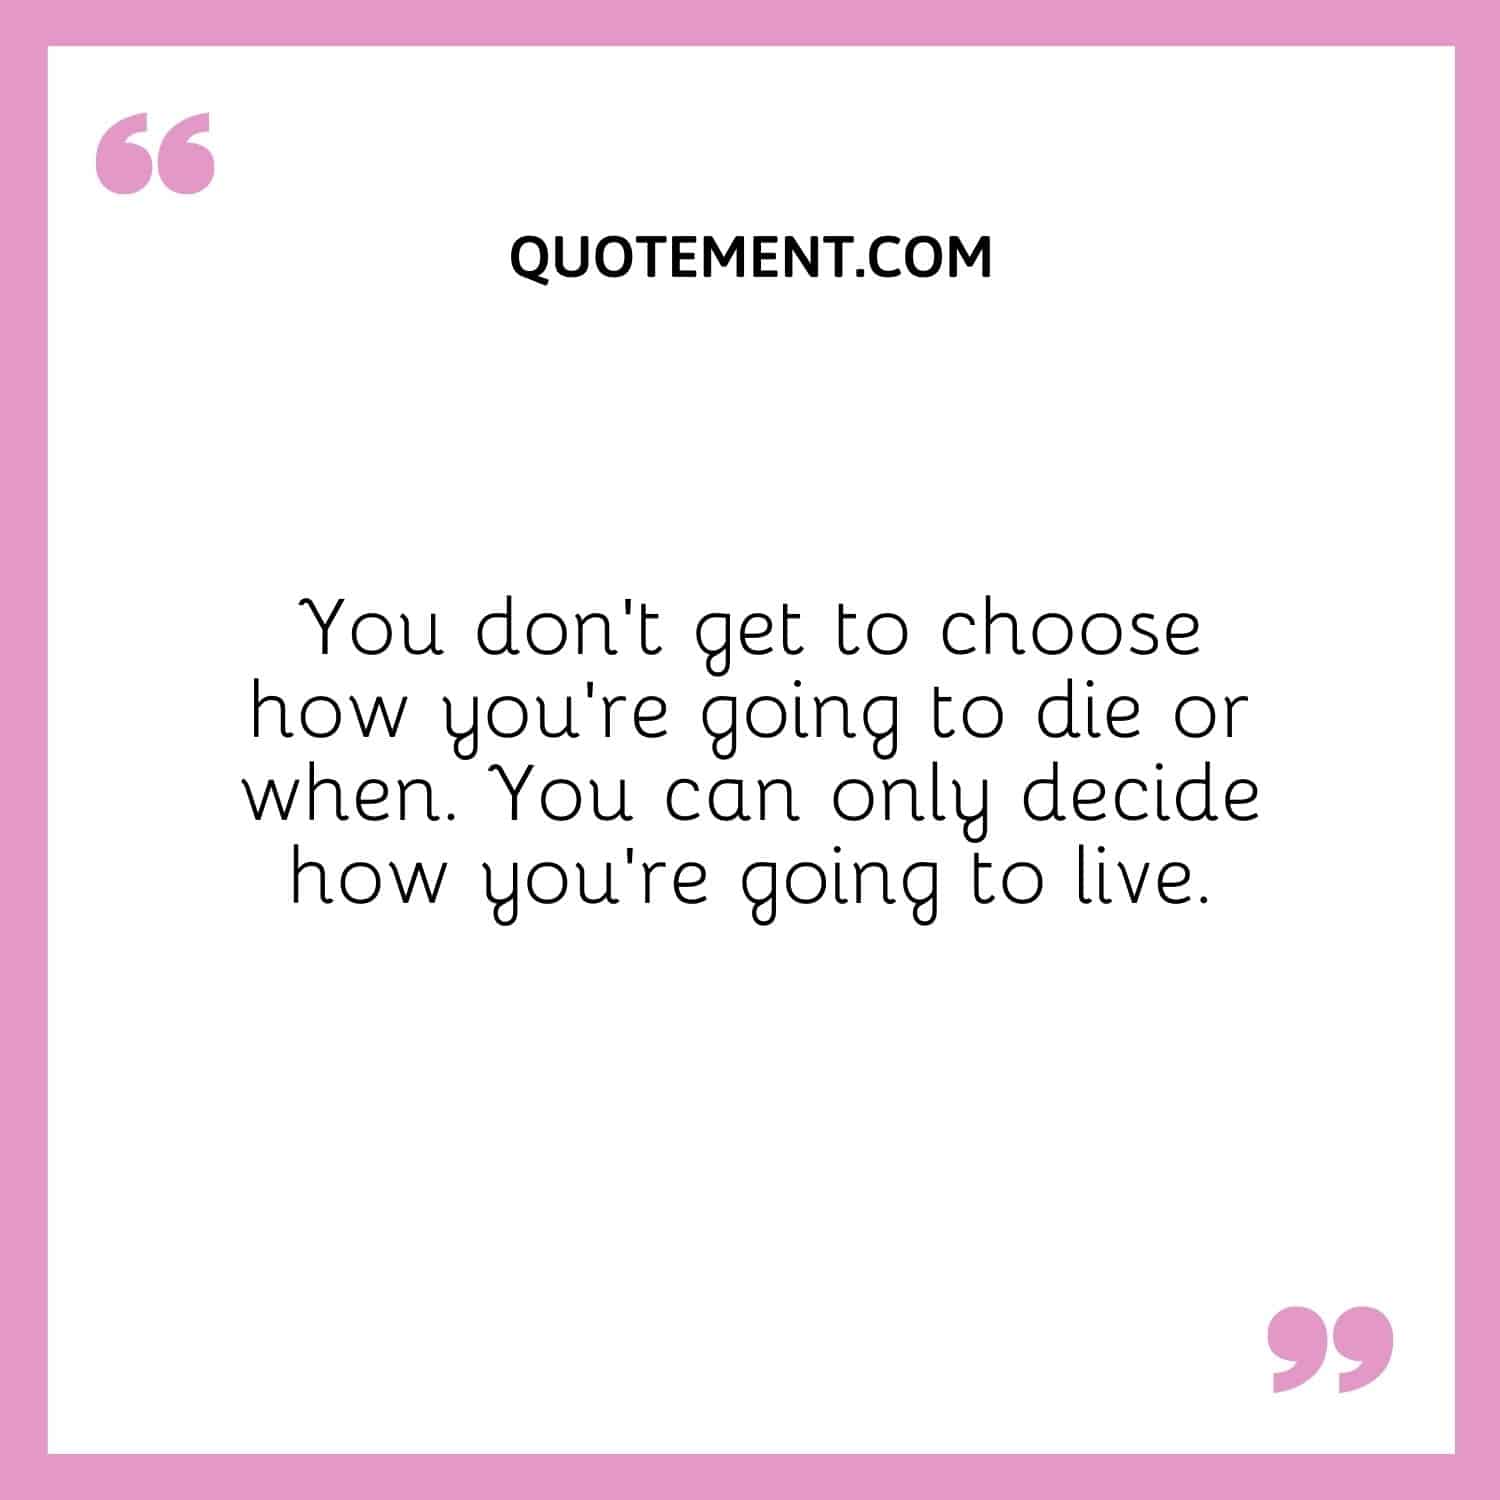 You don’t get to choose how you’re going to die or when. You can only decide how you’re going to live.